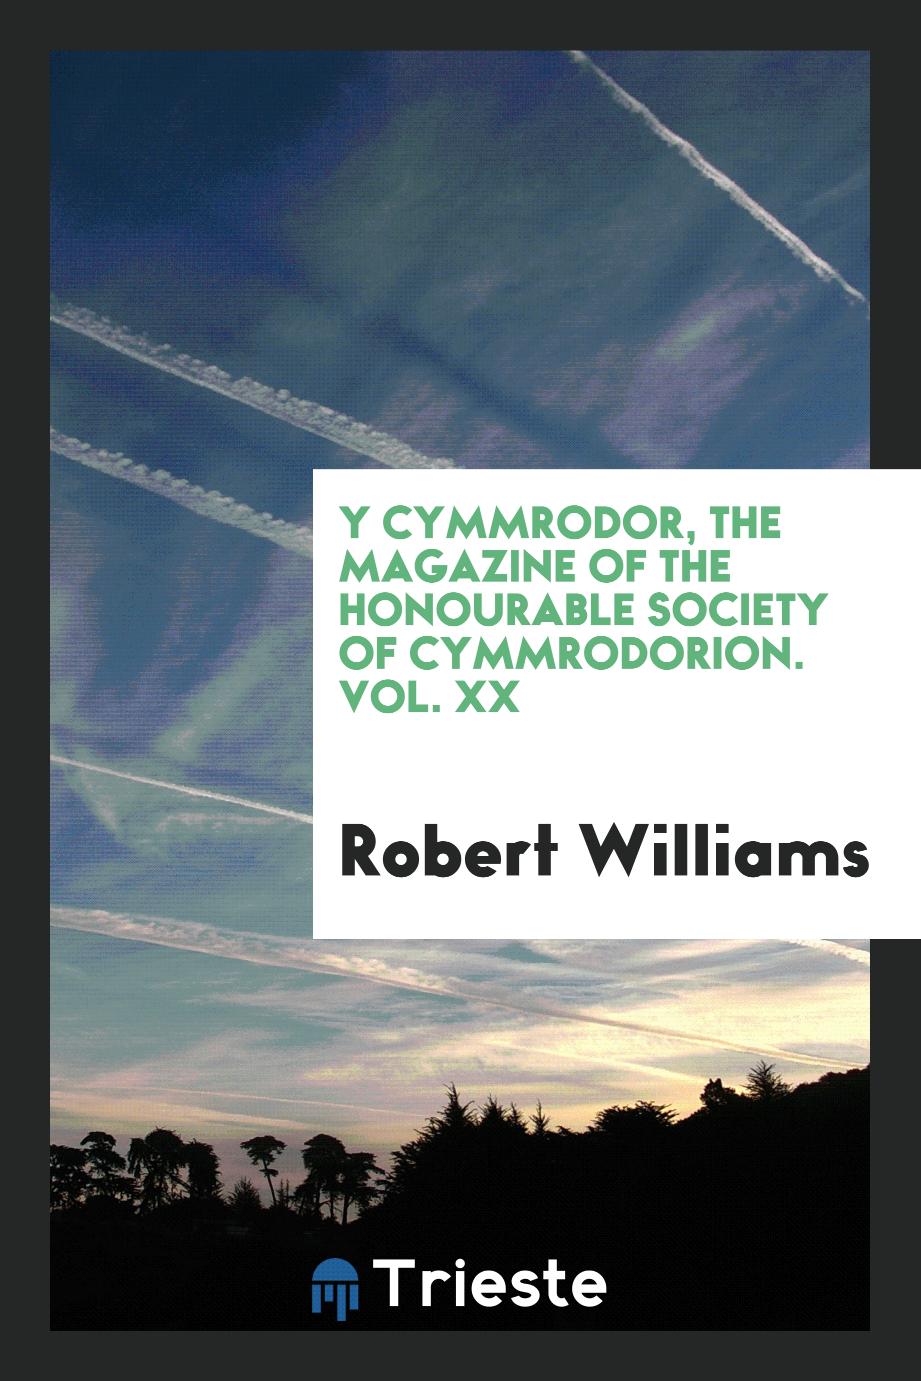 Y Cymmrodor, the magazine of the honourable society of Cymmrodorion. Vol. XX